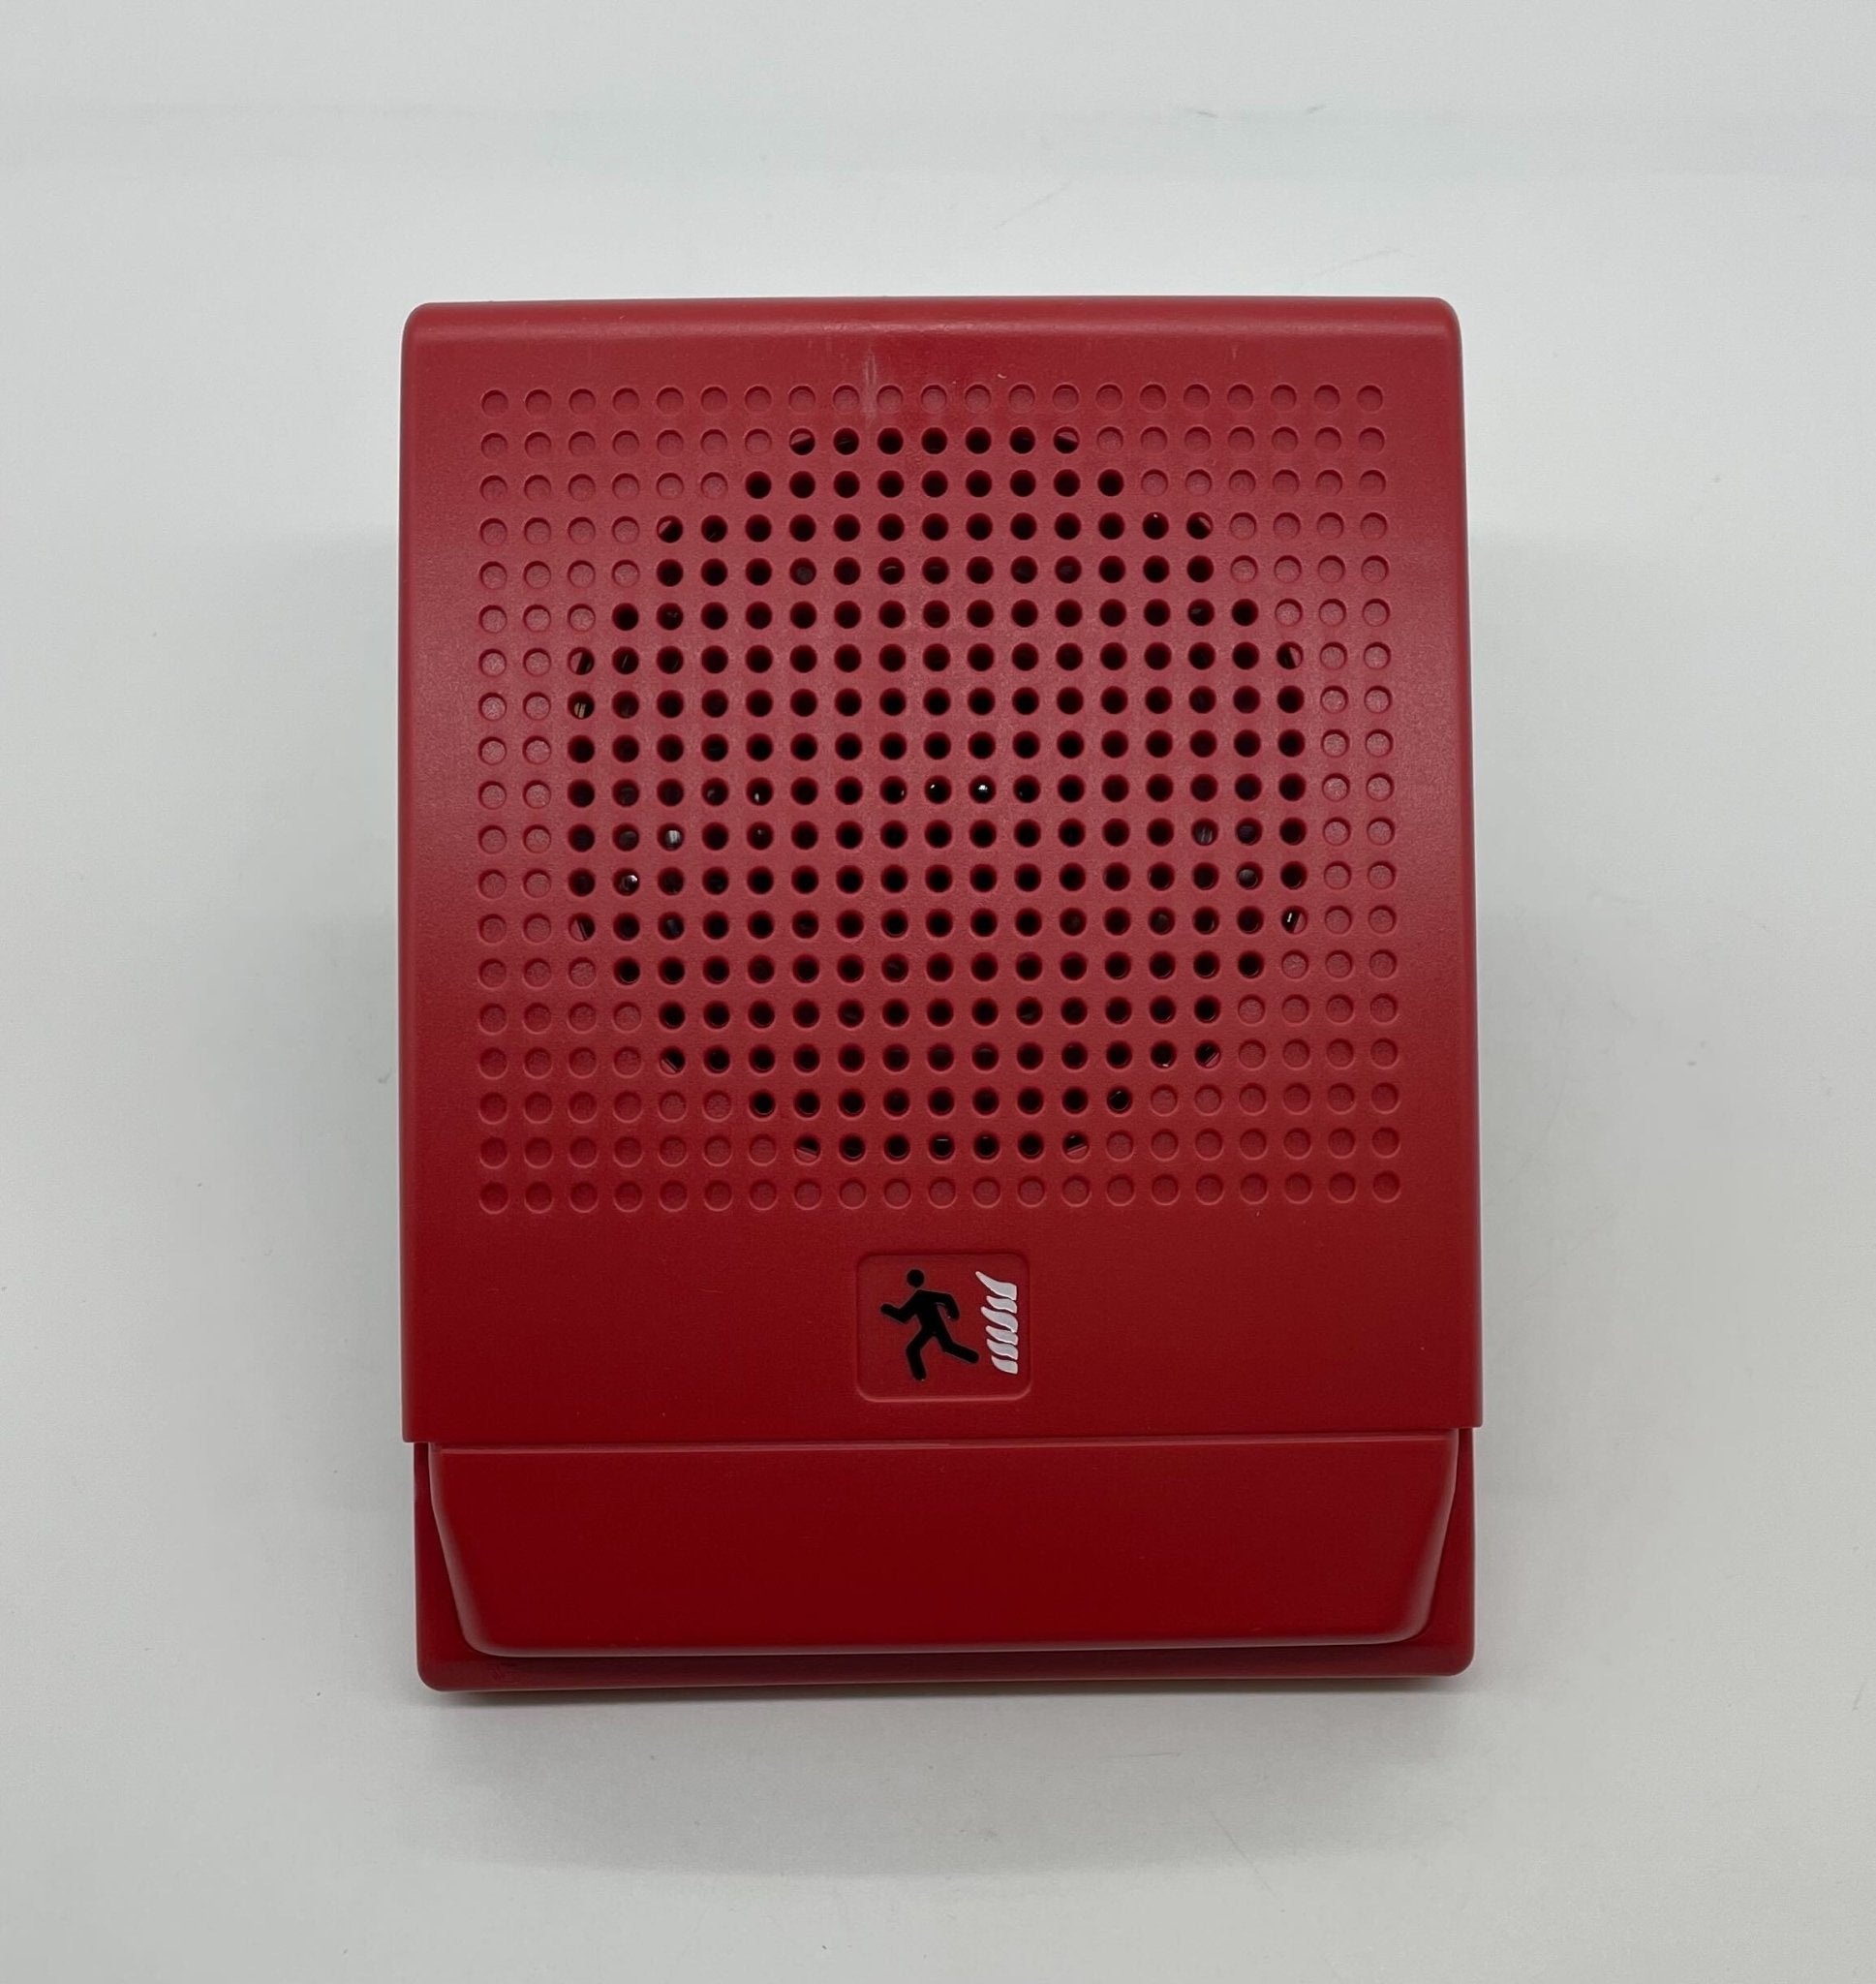 Edwards G4RF-S2 - The Fire Alarm Supplier